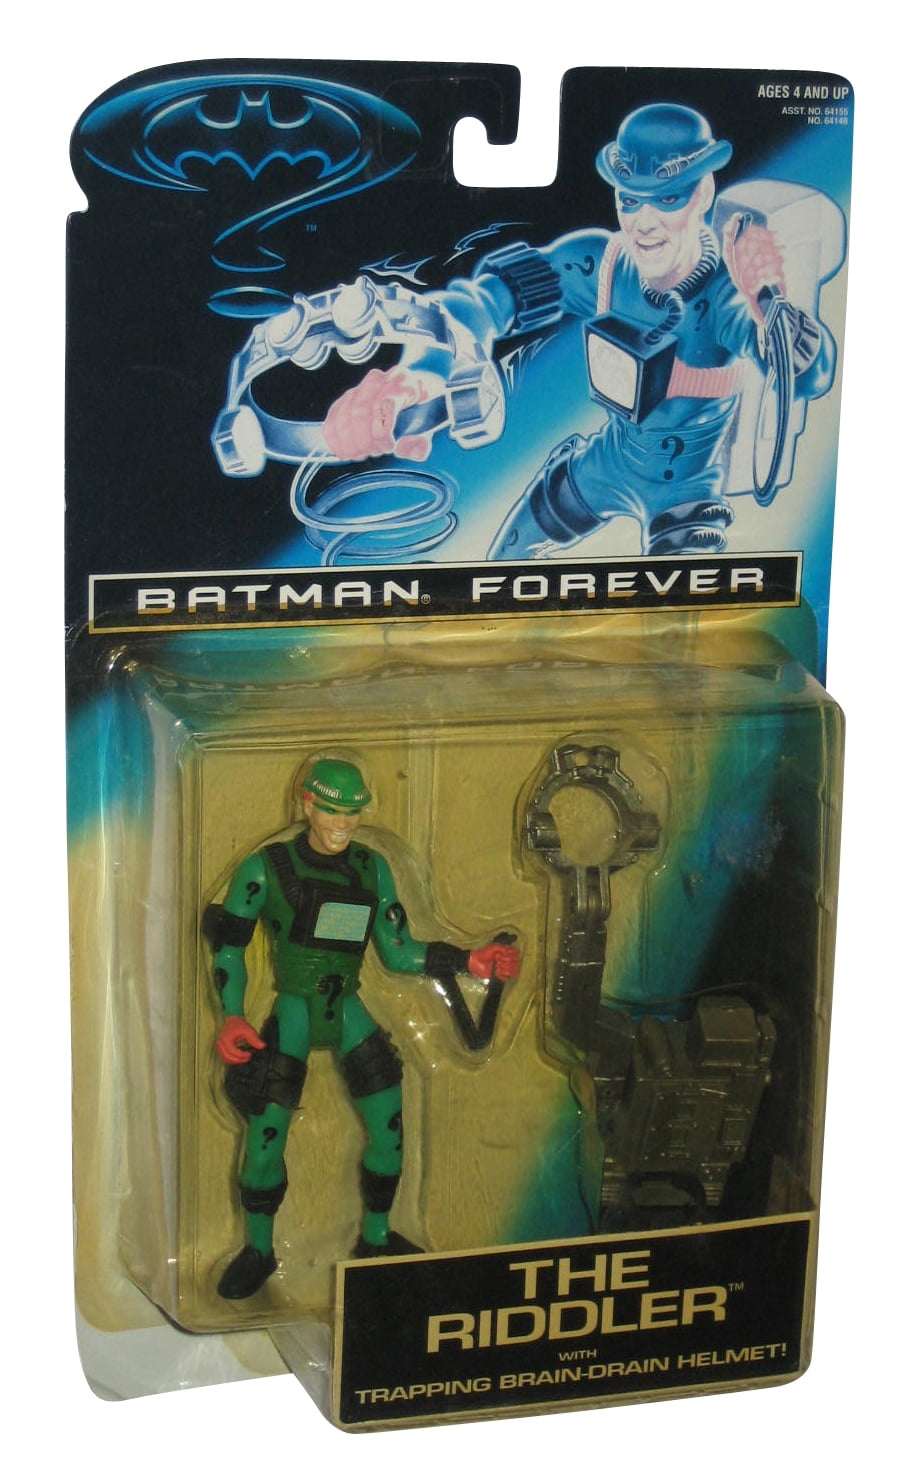 Batman Forever Action Figure for sale online Kenner Jim Carrey As the Riddler with Trapping Brain-Drain Helmet 